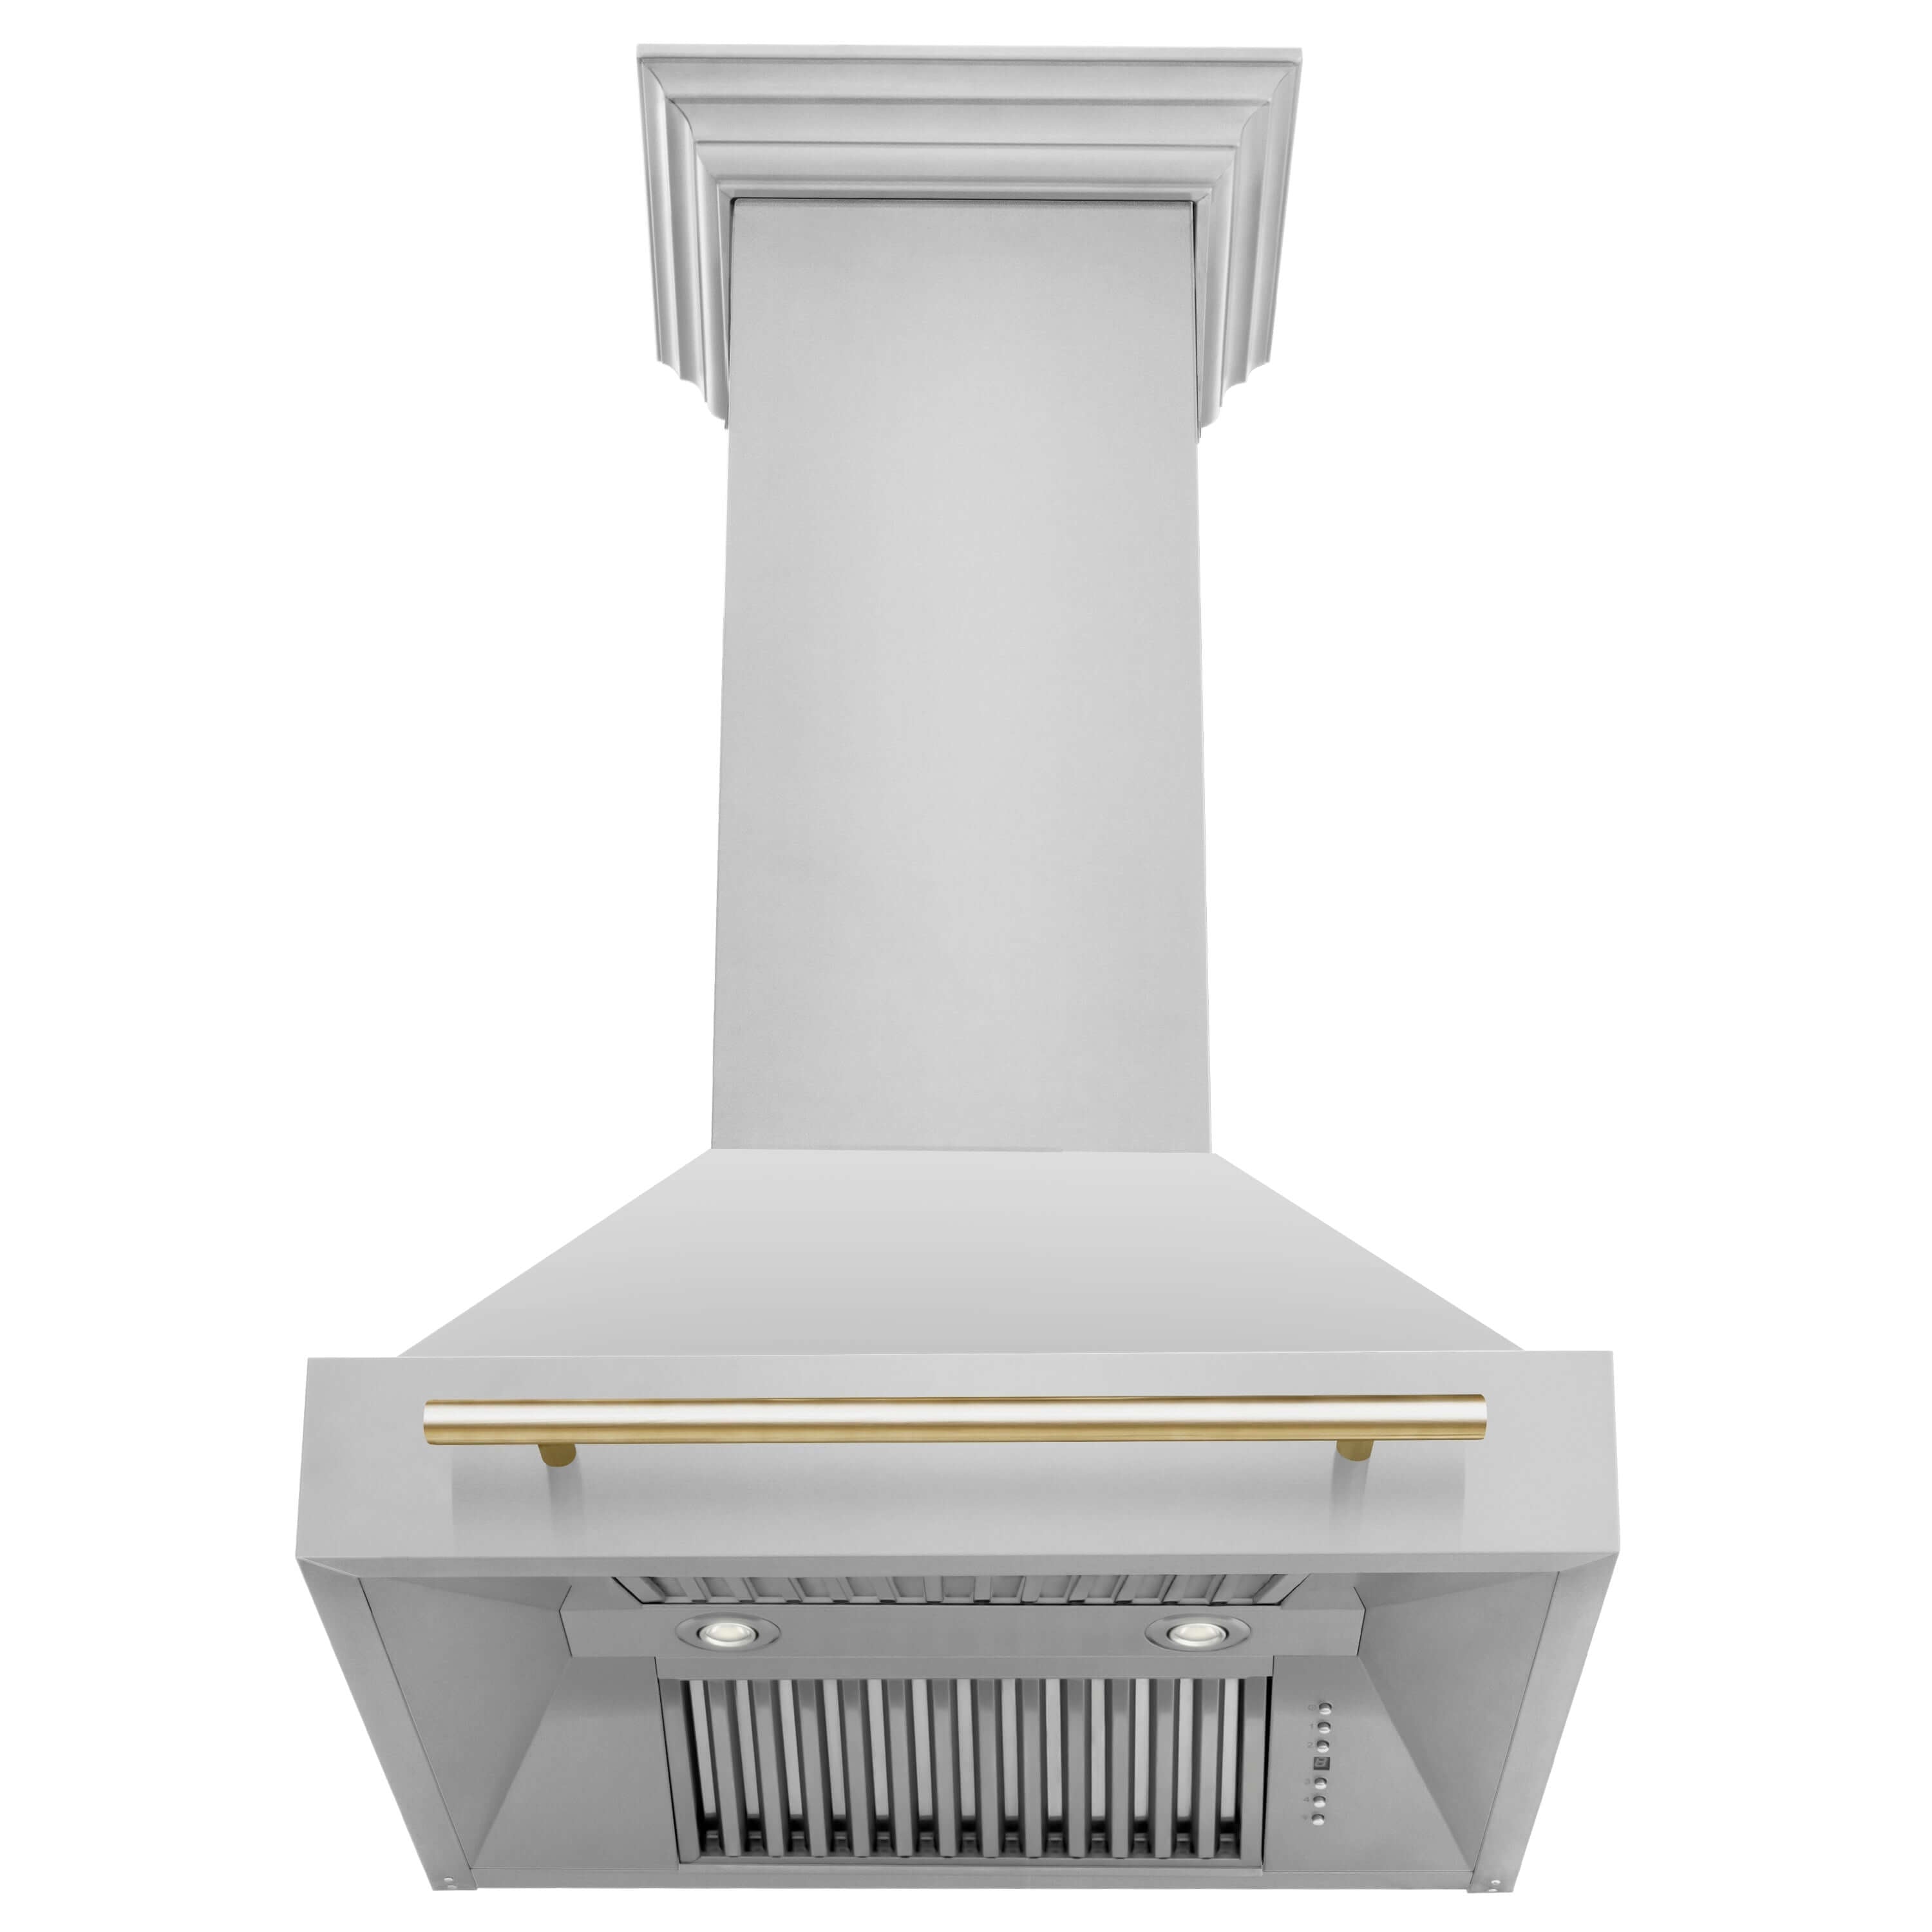 ZLINE Autograph Edition Wall Mount Range Hood with Gold accent handle front under showing baffle filters.